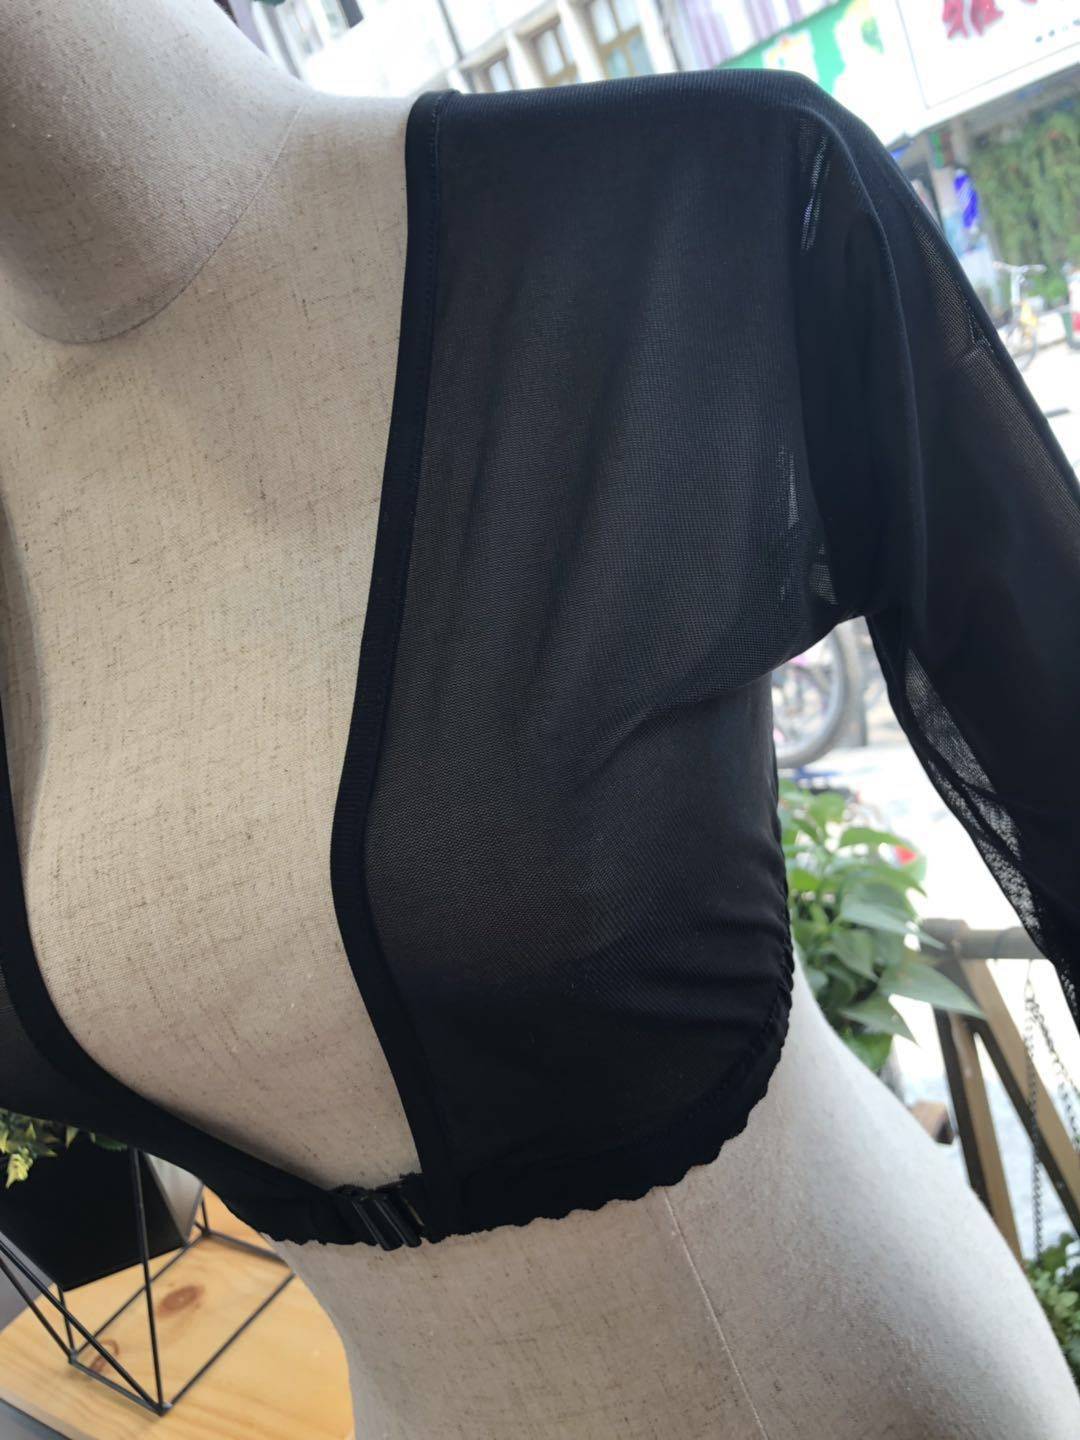 Long Sleeve Mesh Shaping Top - Kawaii Stop - Adorable, Arm Control, Black, Blue, Broadcloth, Camis &amp; Tops, Cute, Fashion, Harajuku, Hollow Out, Japanese, Kawaii, Korean, Leisure, Mesh, Plus Size, Polyester, Red, Shaping, Skin, Solid, Summer, Top, Tops, Tops &amp; Tees, V-Neck, White, Women's Clothing &amp; Accessories